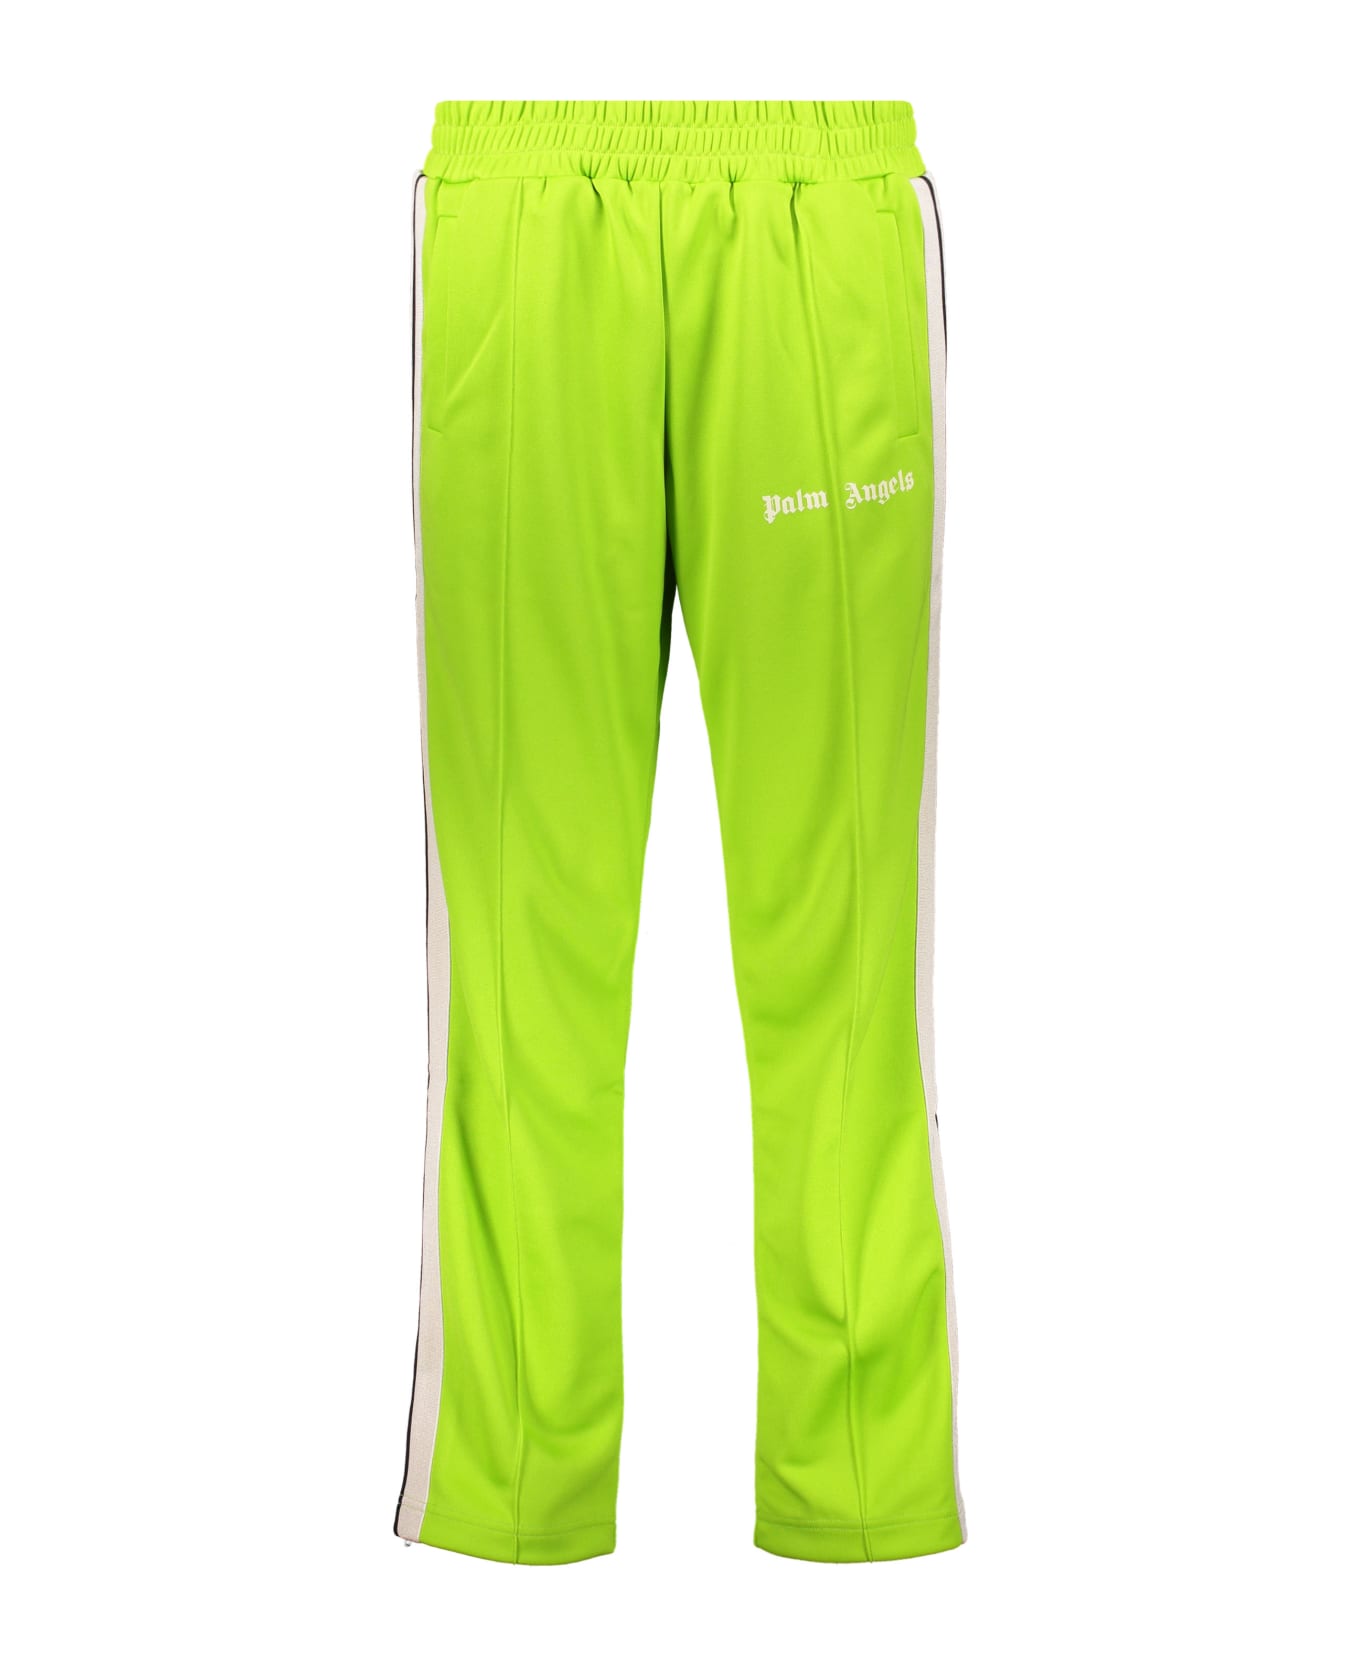 Palm Angels Contrast Side Stripes Trousers - green ボトムス